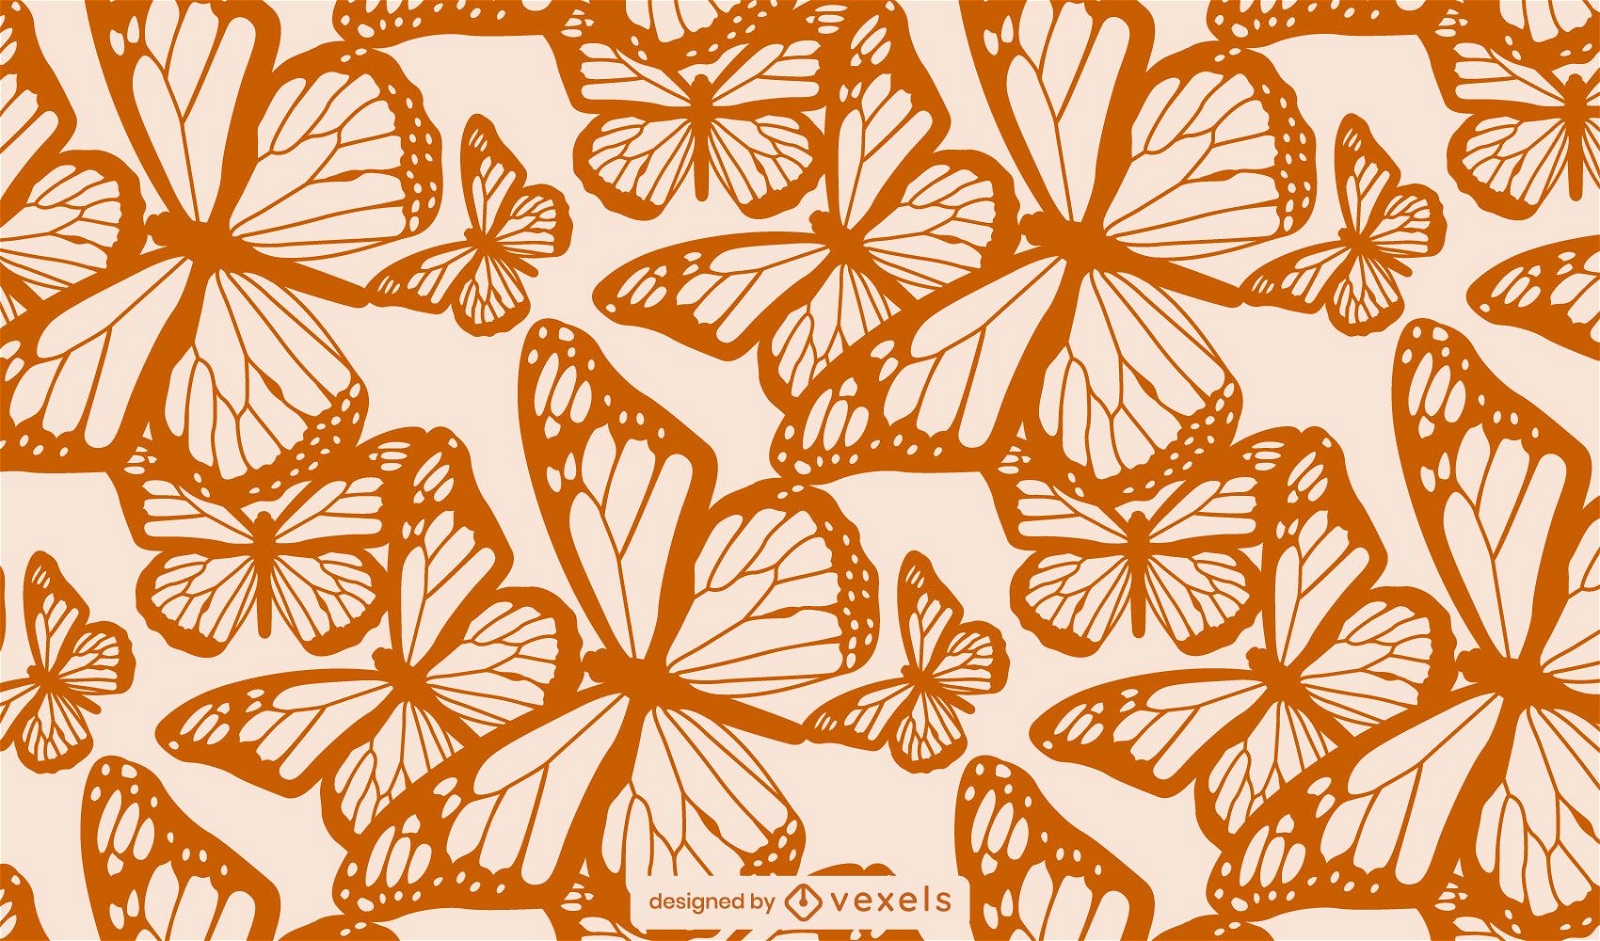 Butterfly texture tileable pattern